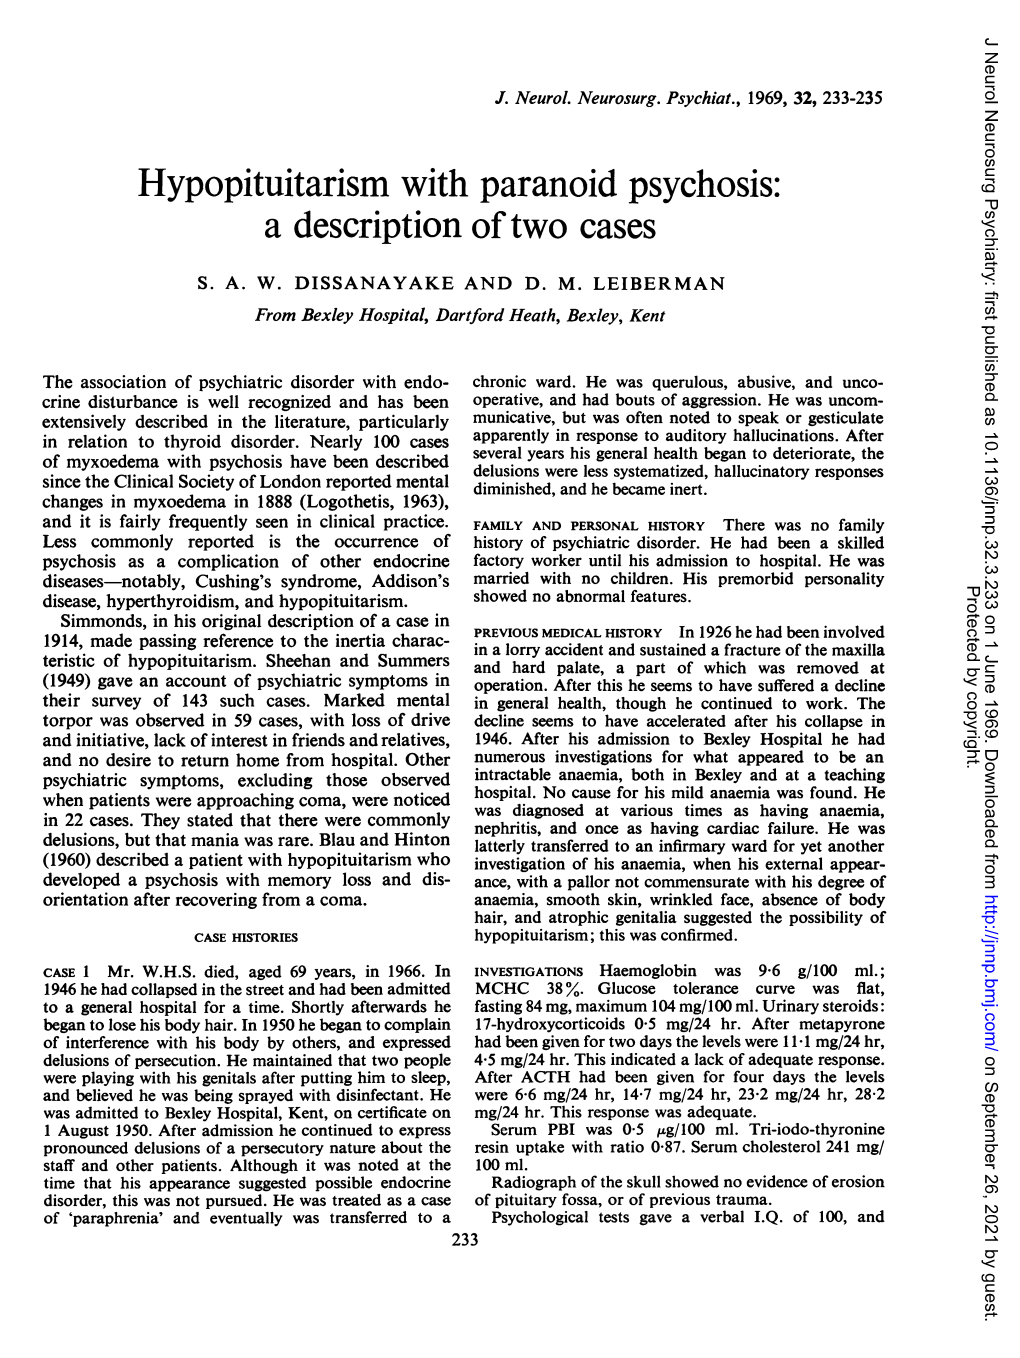 Hypopituitarism with Paranoid Psychosis: a Description Oftwo Cases